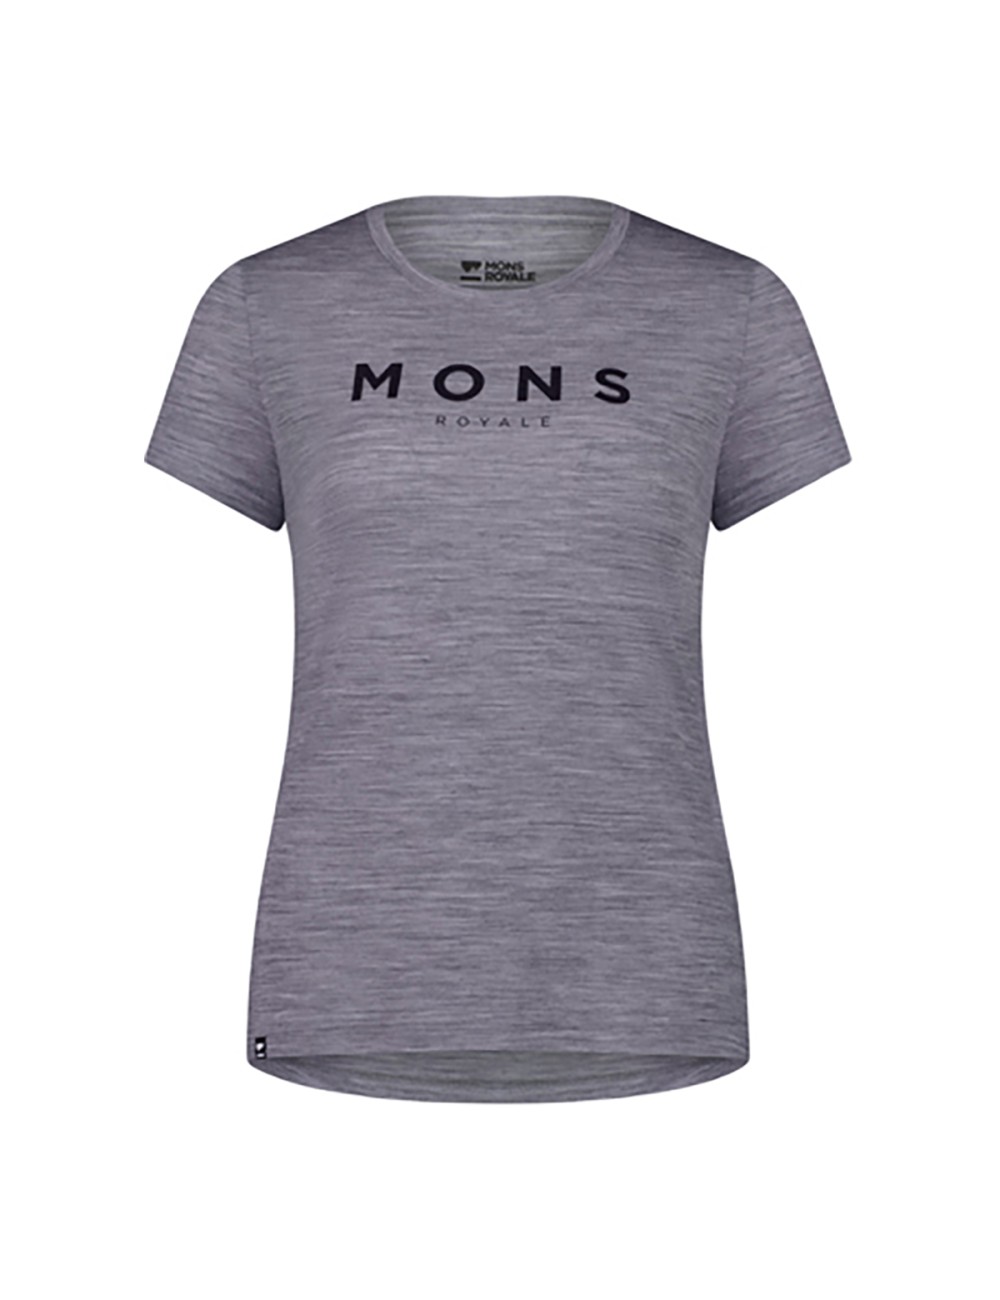 Mons Royale Wms Icon Tee - Grey